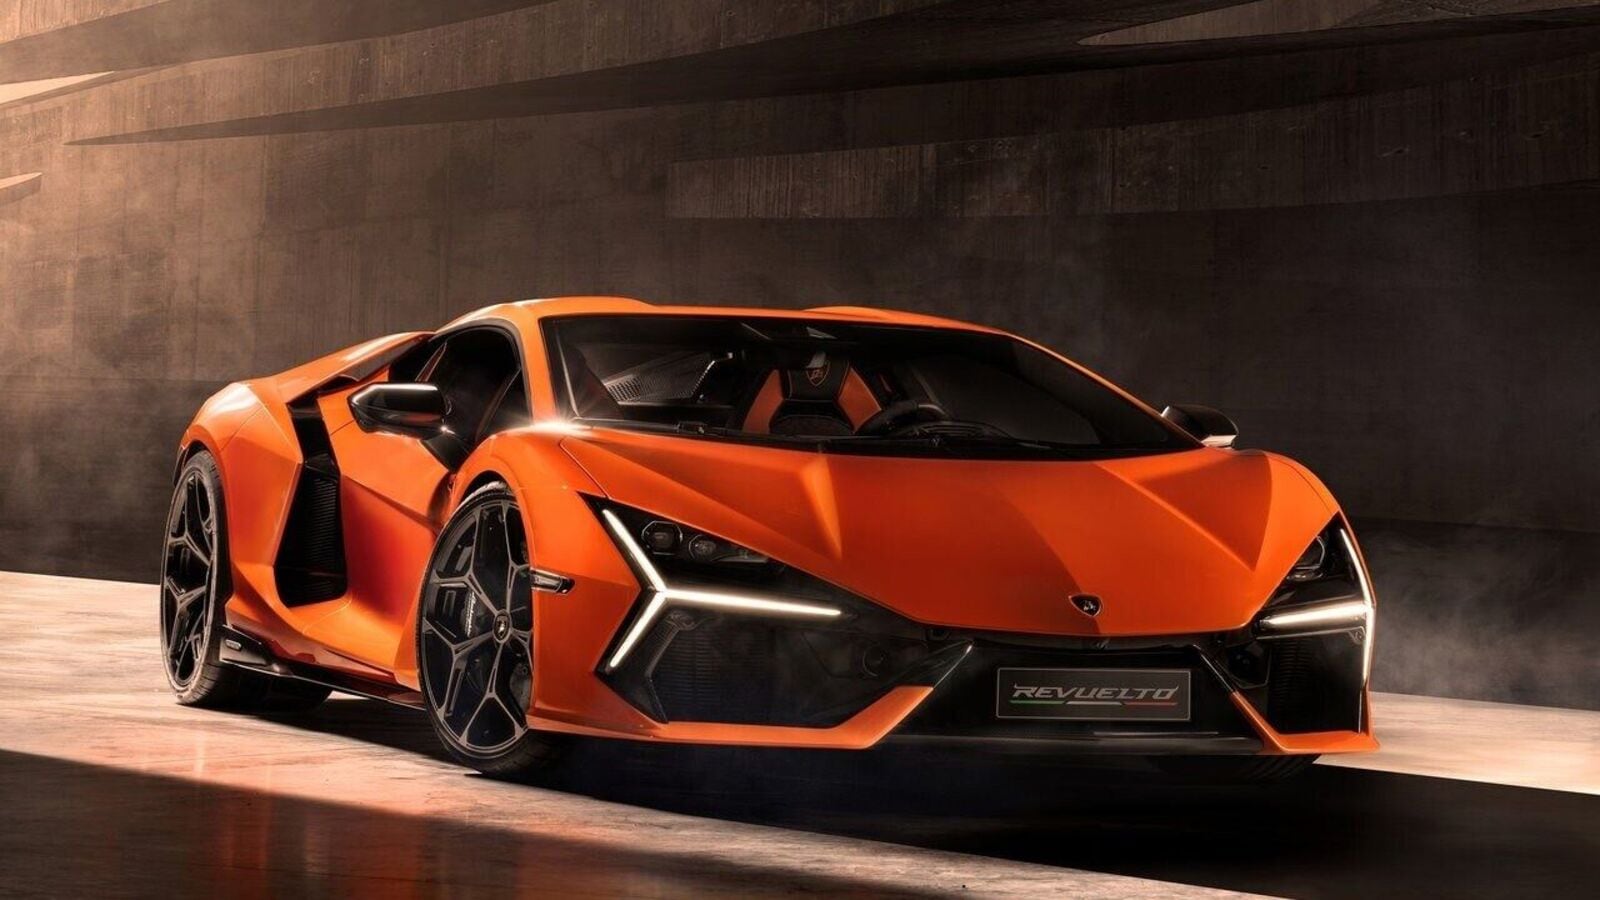 Lamborghini Revuelto with 1000 bhp to launch in India on December 6th